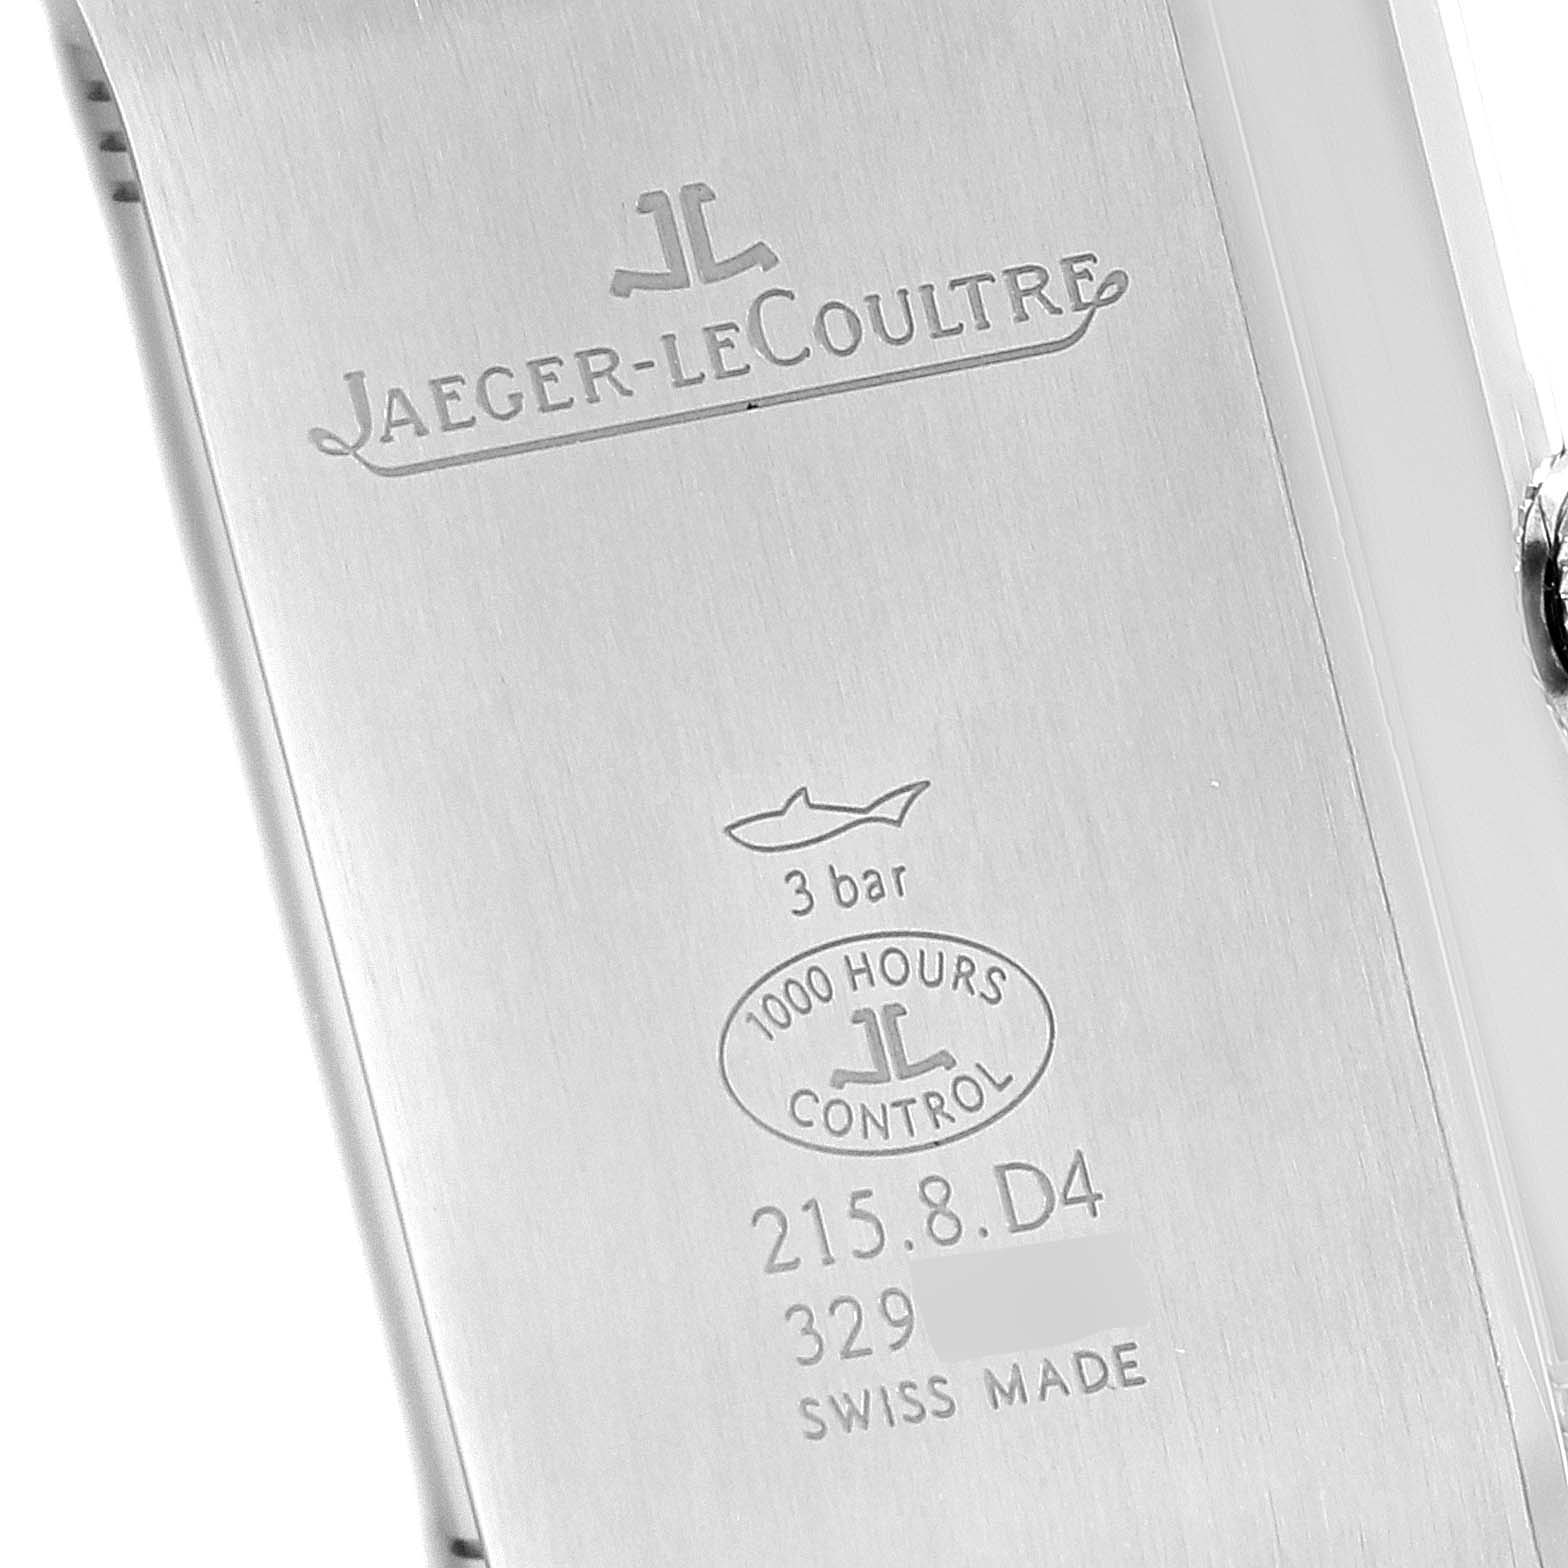 Jaeger LeCoultre Reverso Duo Day Night Watch 215.8.D4 Q3848420 Box Card ...